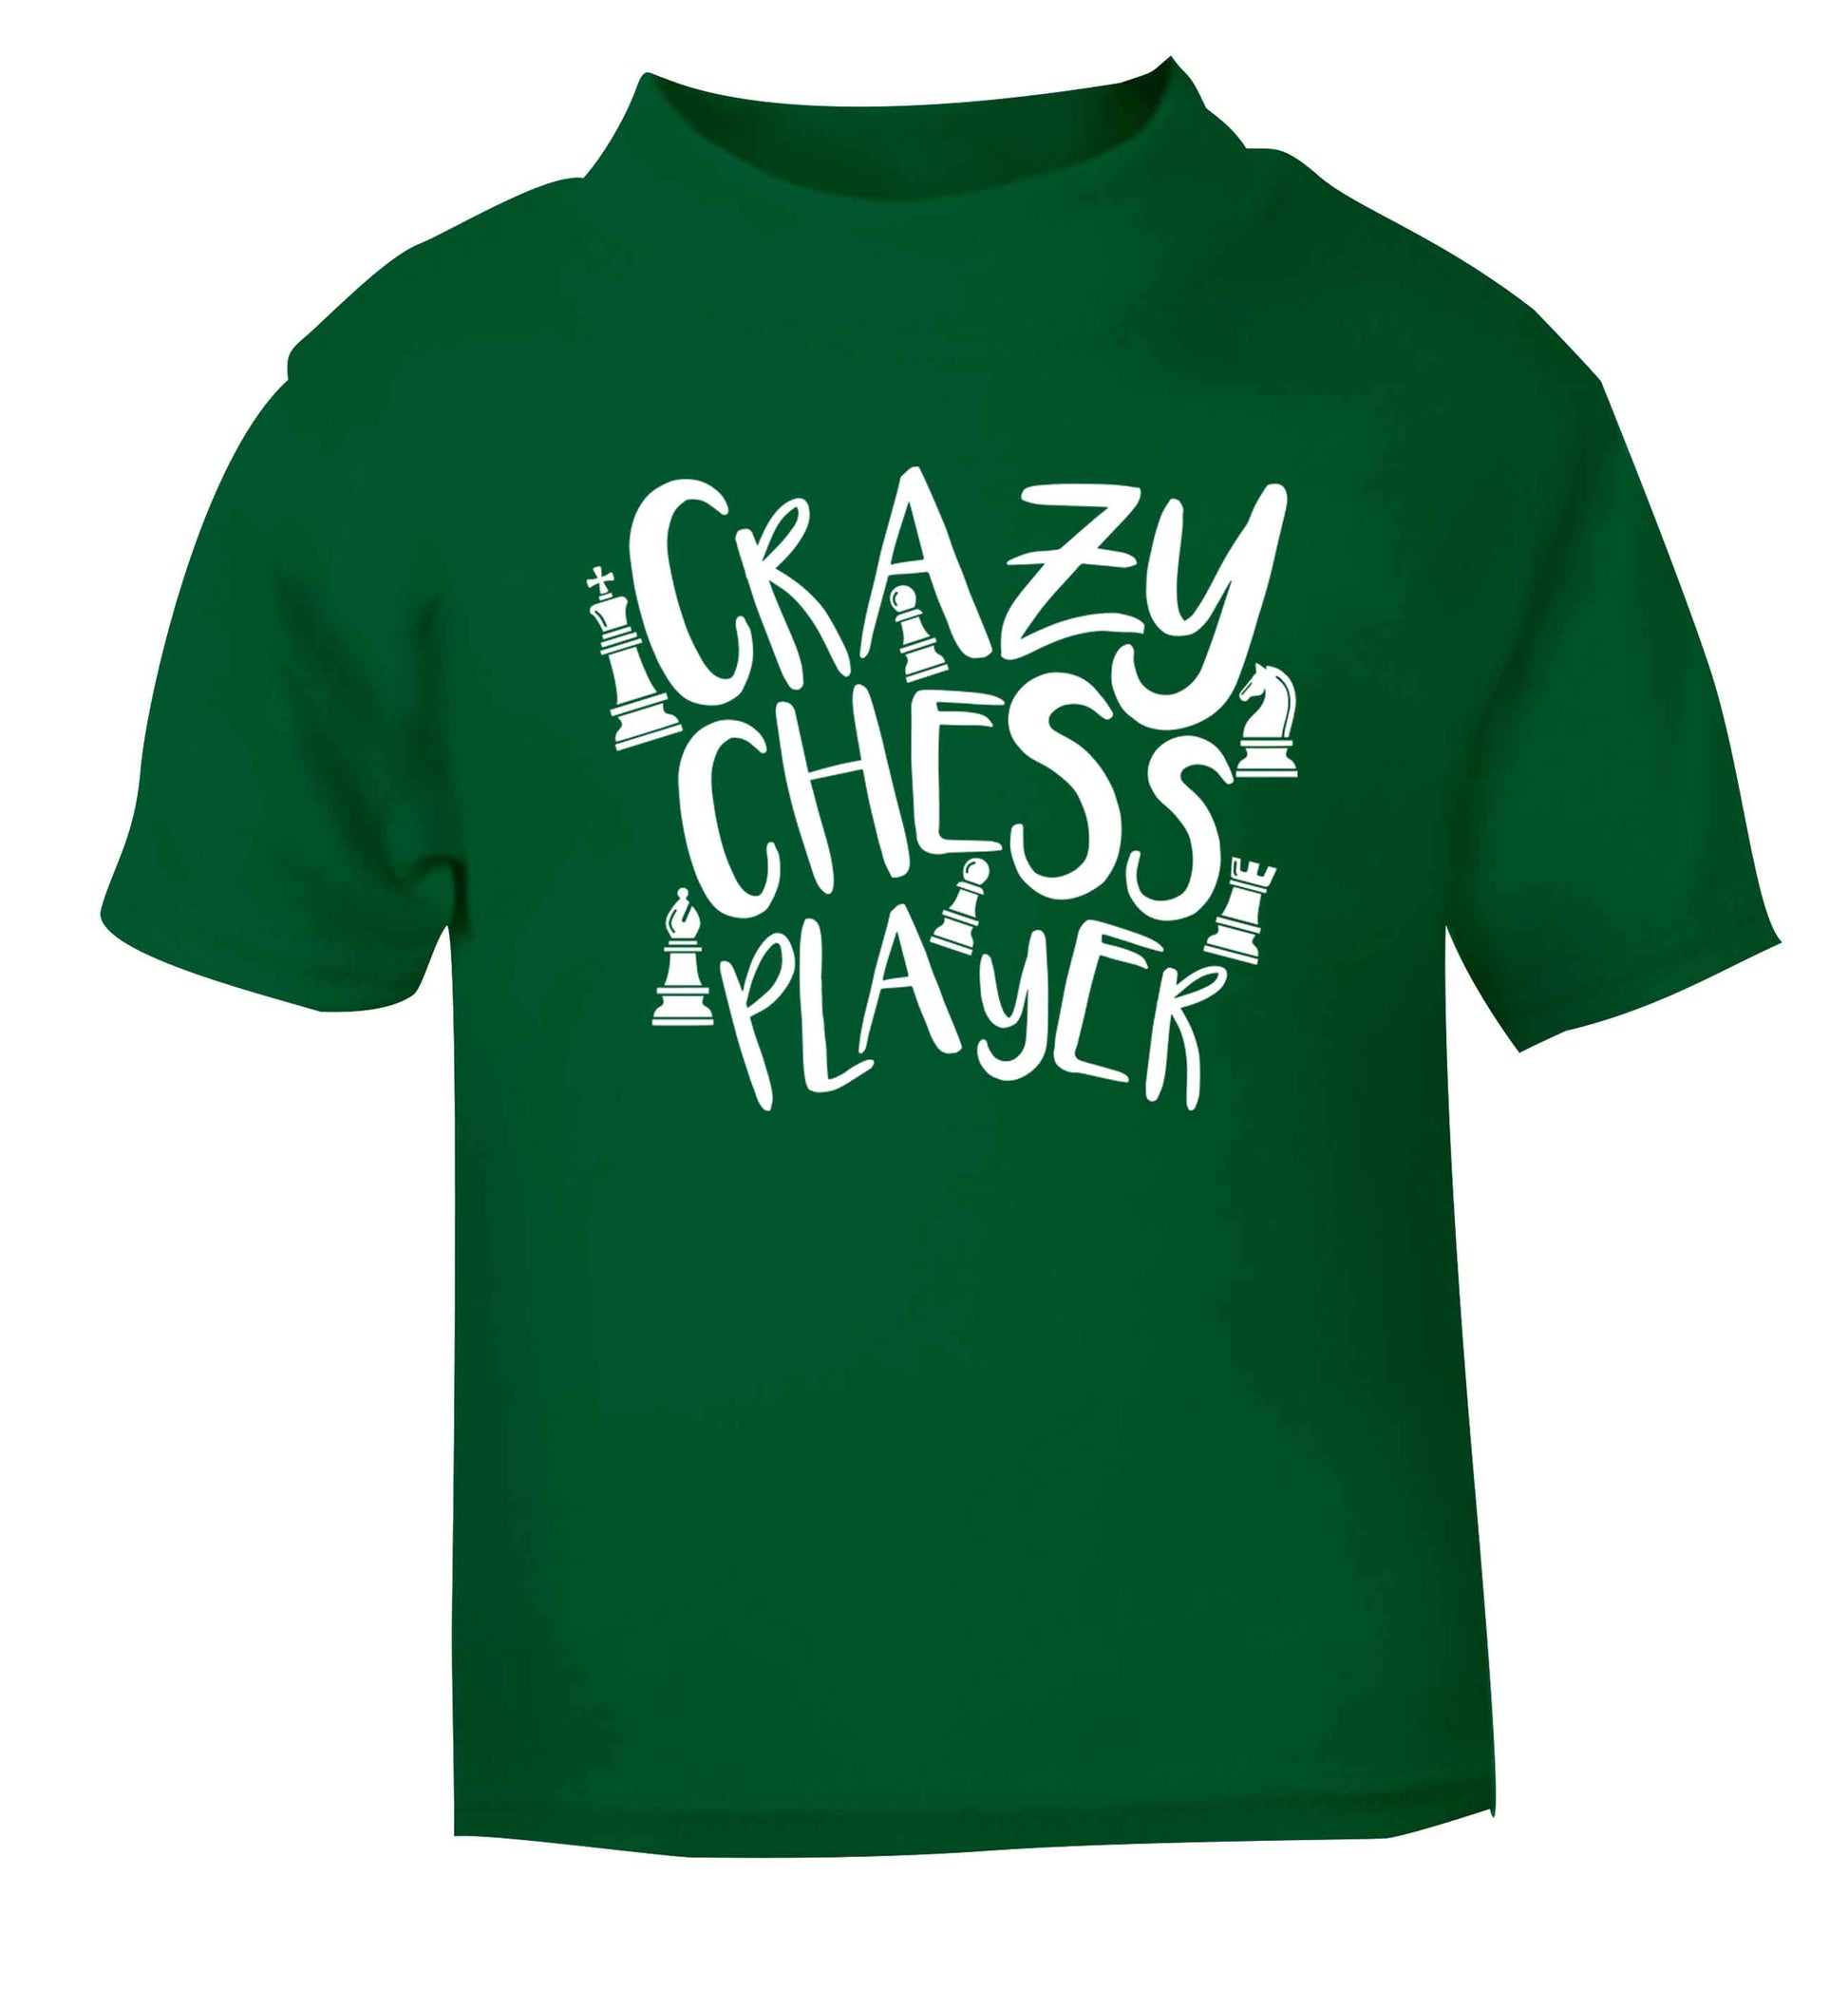 Crazy chess player green Baby Toddler Tshirt 2 Years